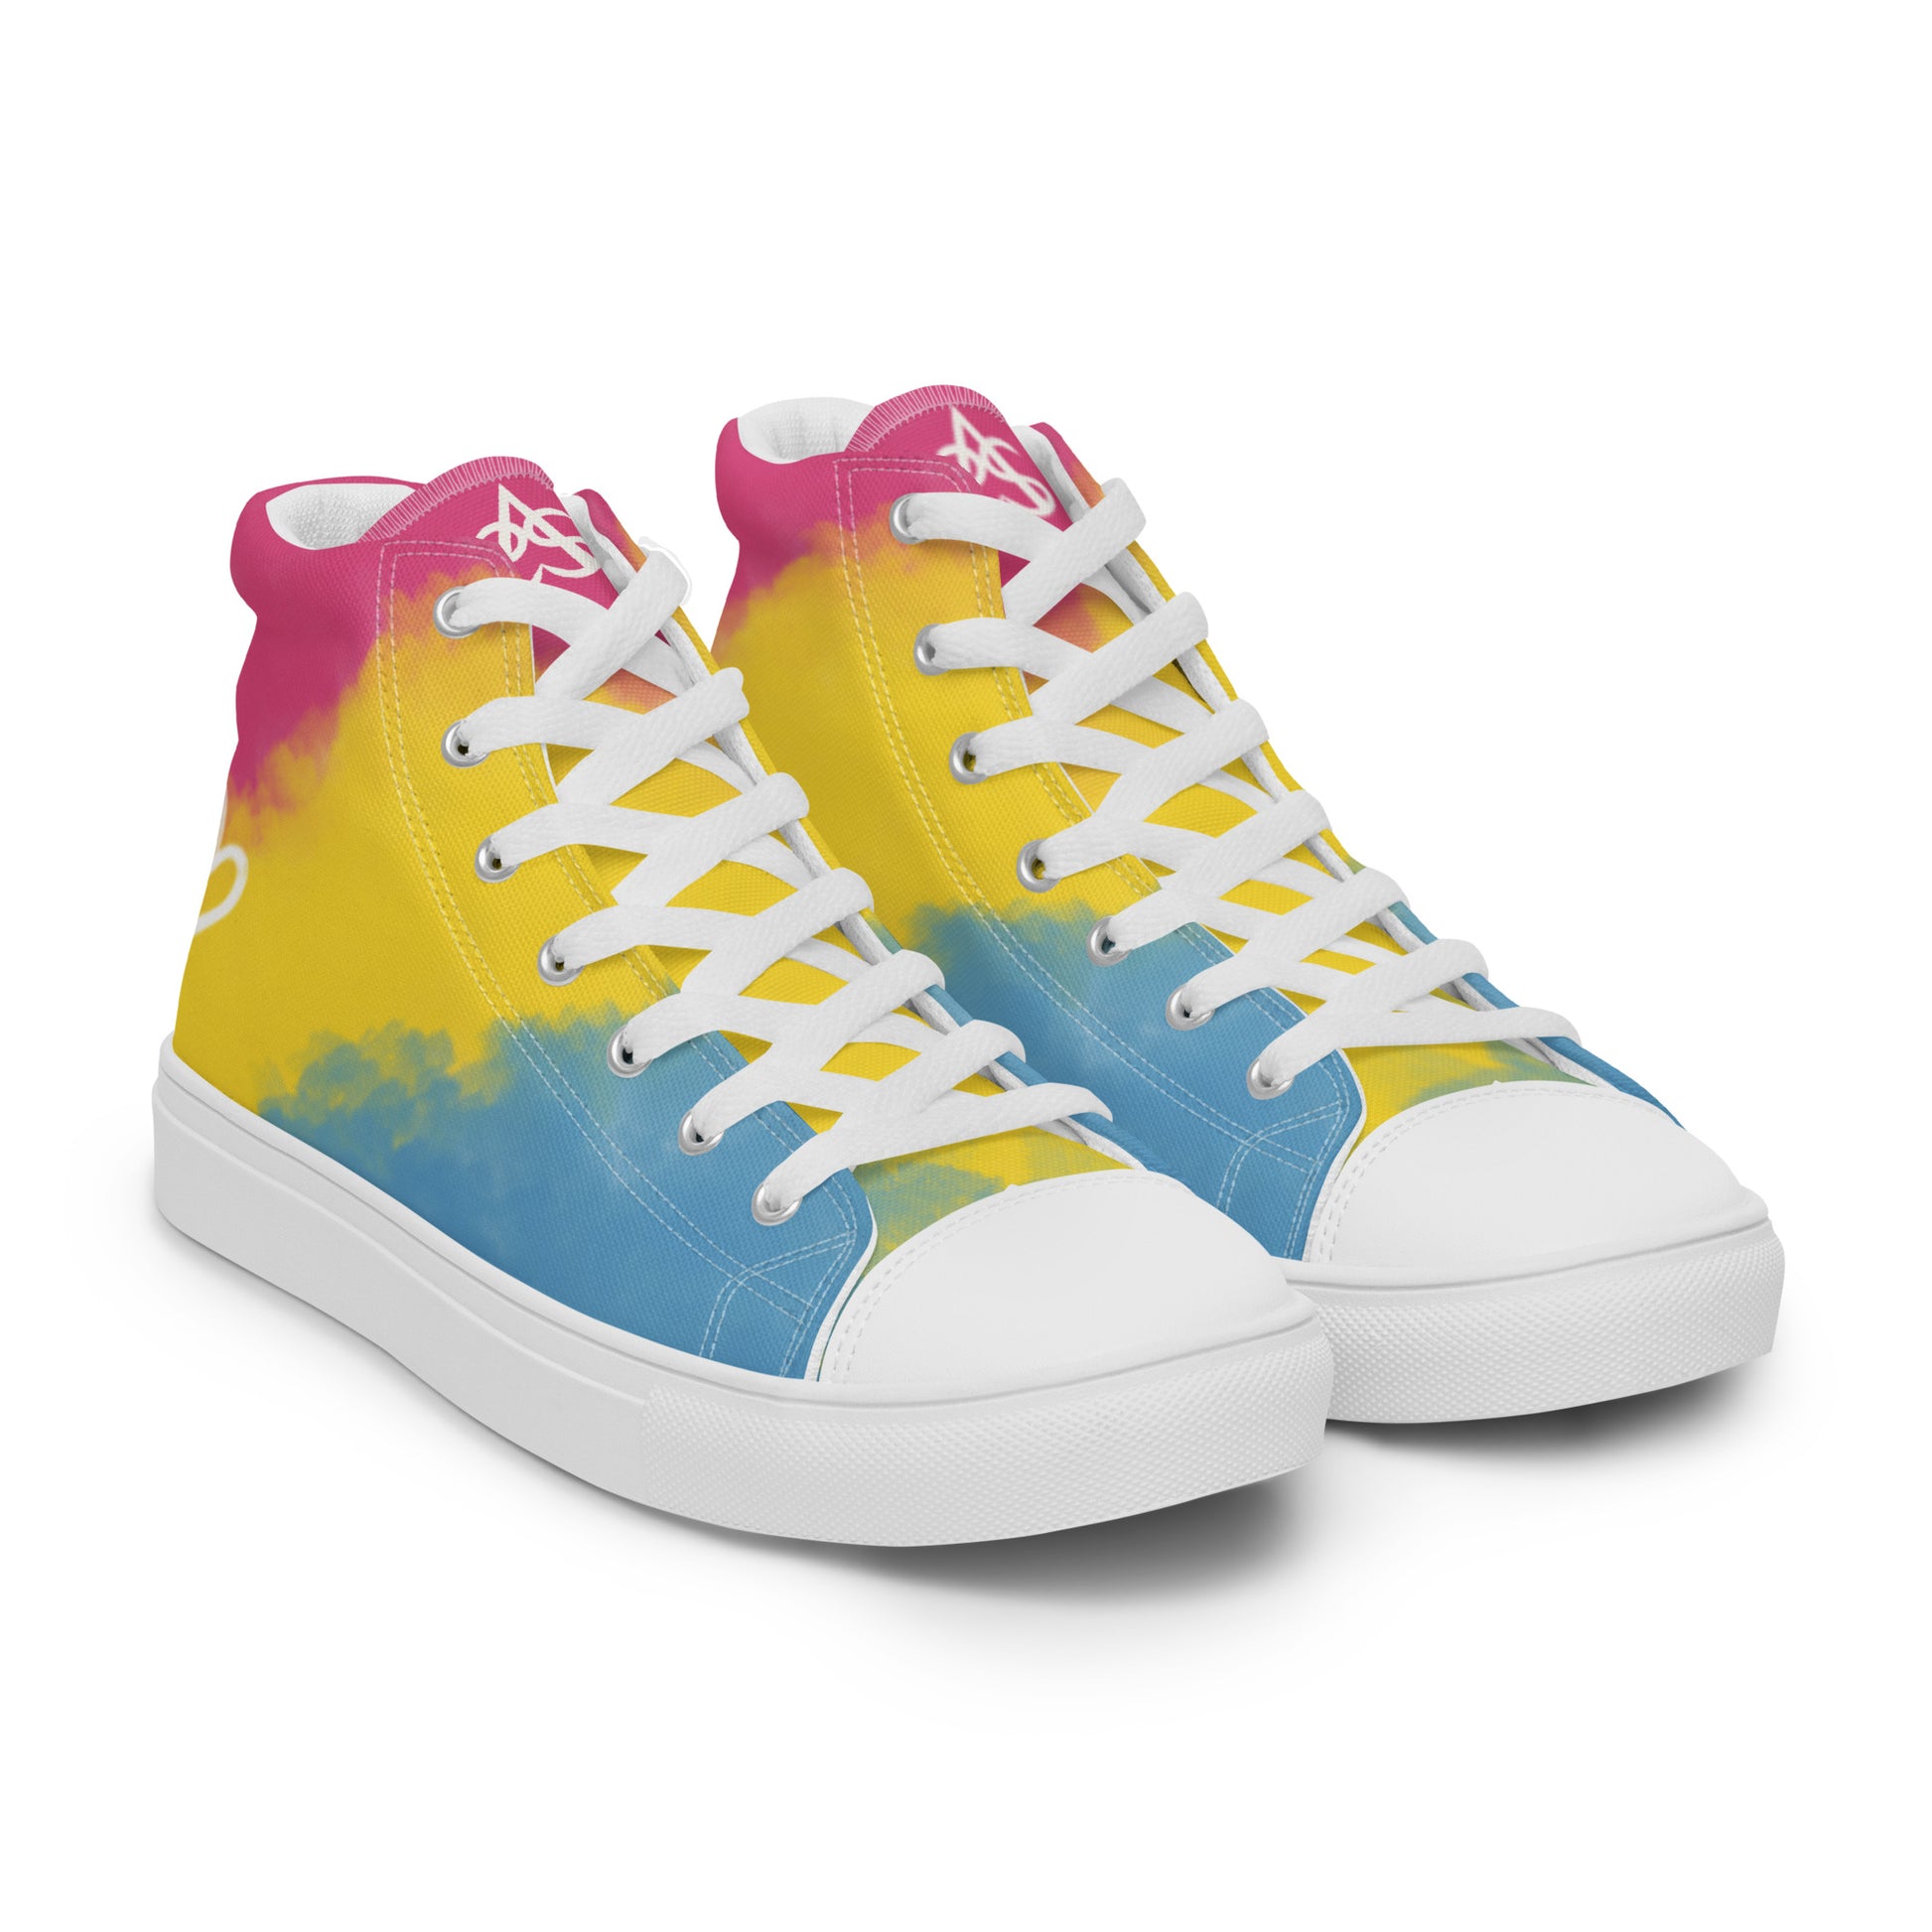 Right front view: a pair of high top shoes with color block pink, yellow, and blue clouds, a white hand drawn heart, and the Aras Sivad logo on the back.